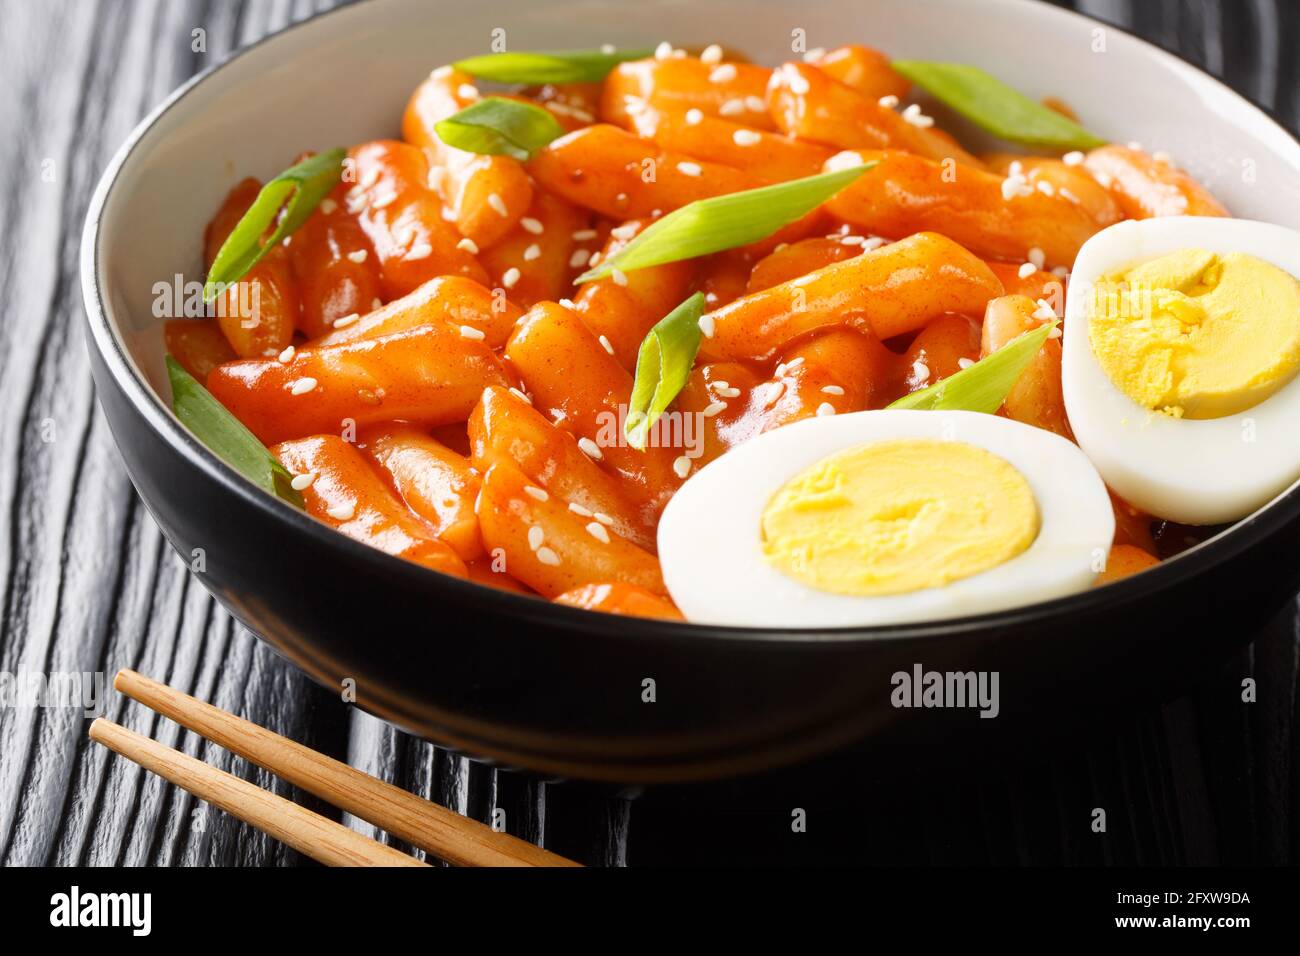 Hot and spicy rice cake Tteokbokki recipe close-up in a bowl on the table. horizontal Stock Photo